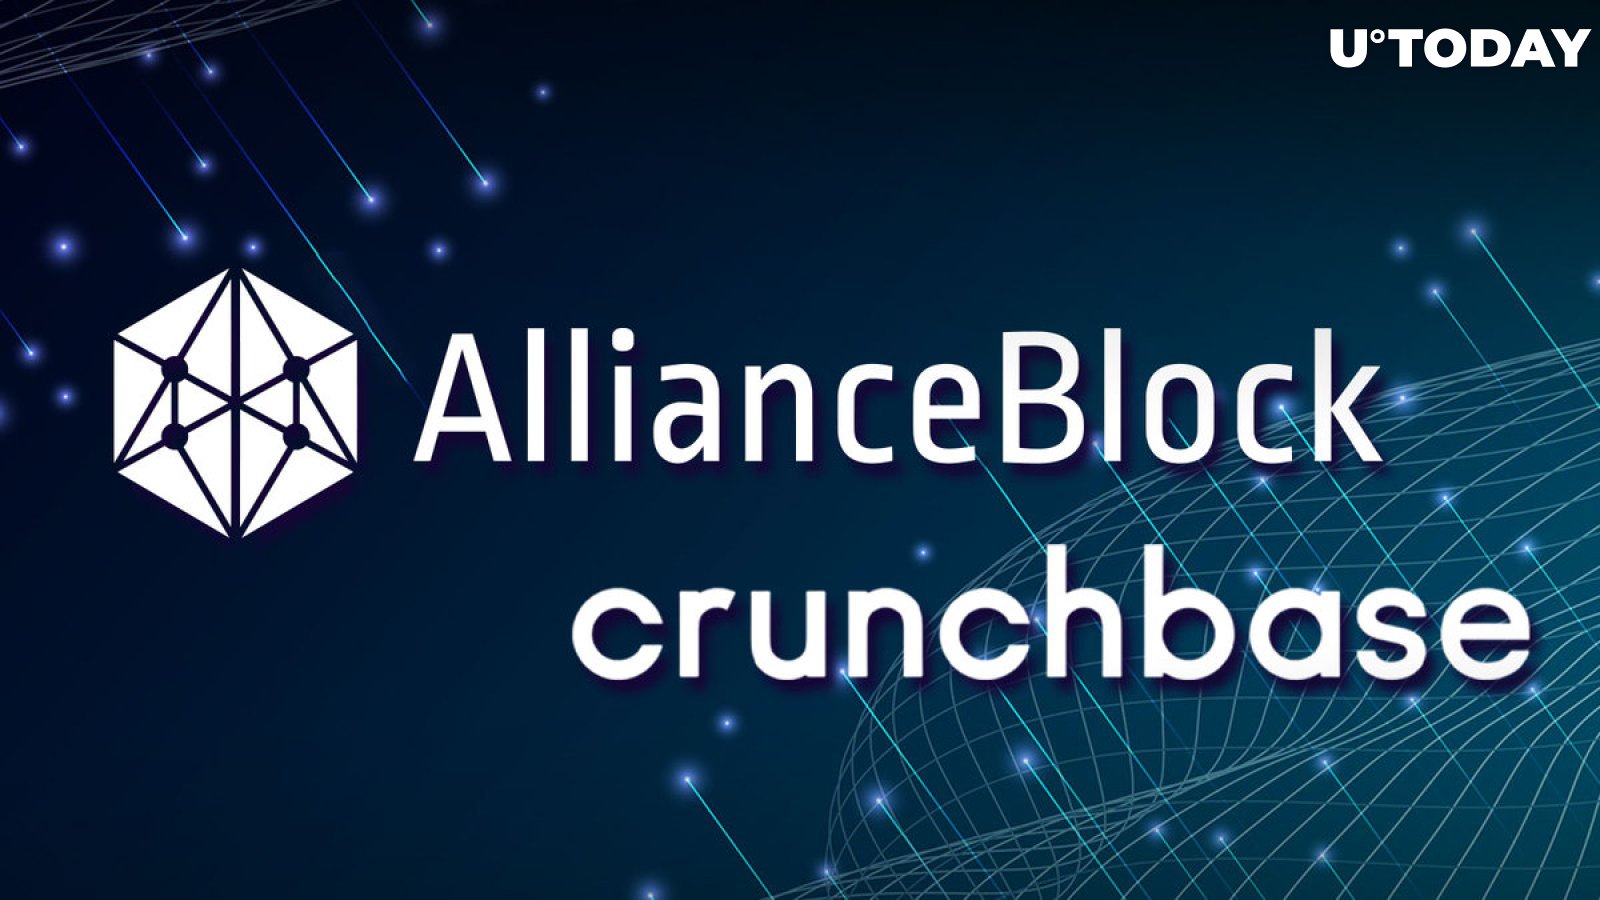 AllianceBlock Partners With Crunchbase to Introduce Reliable Business Data to DeFi